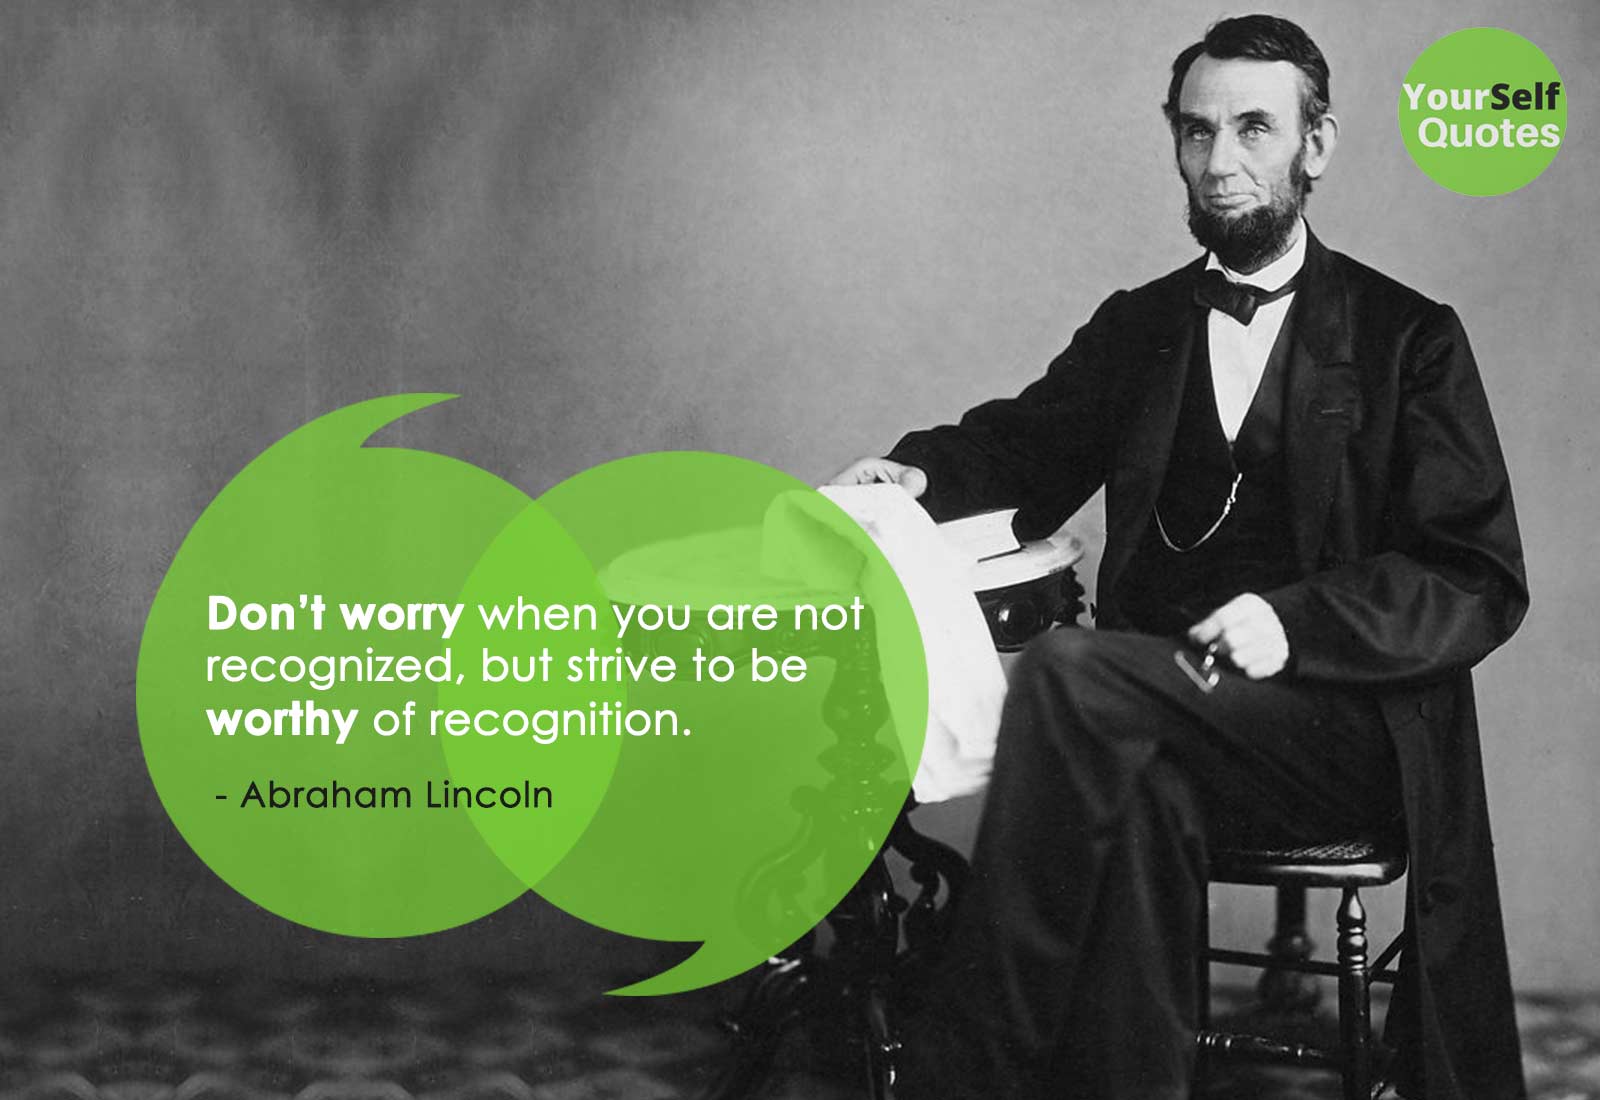 Abraham Lincoln Quotes on Education